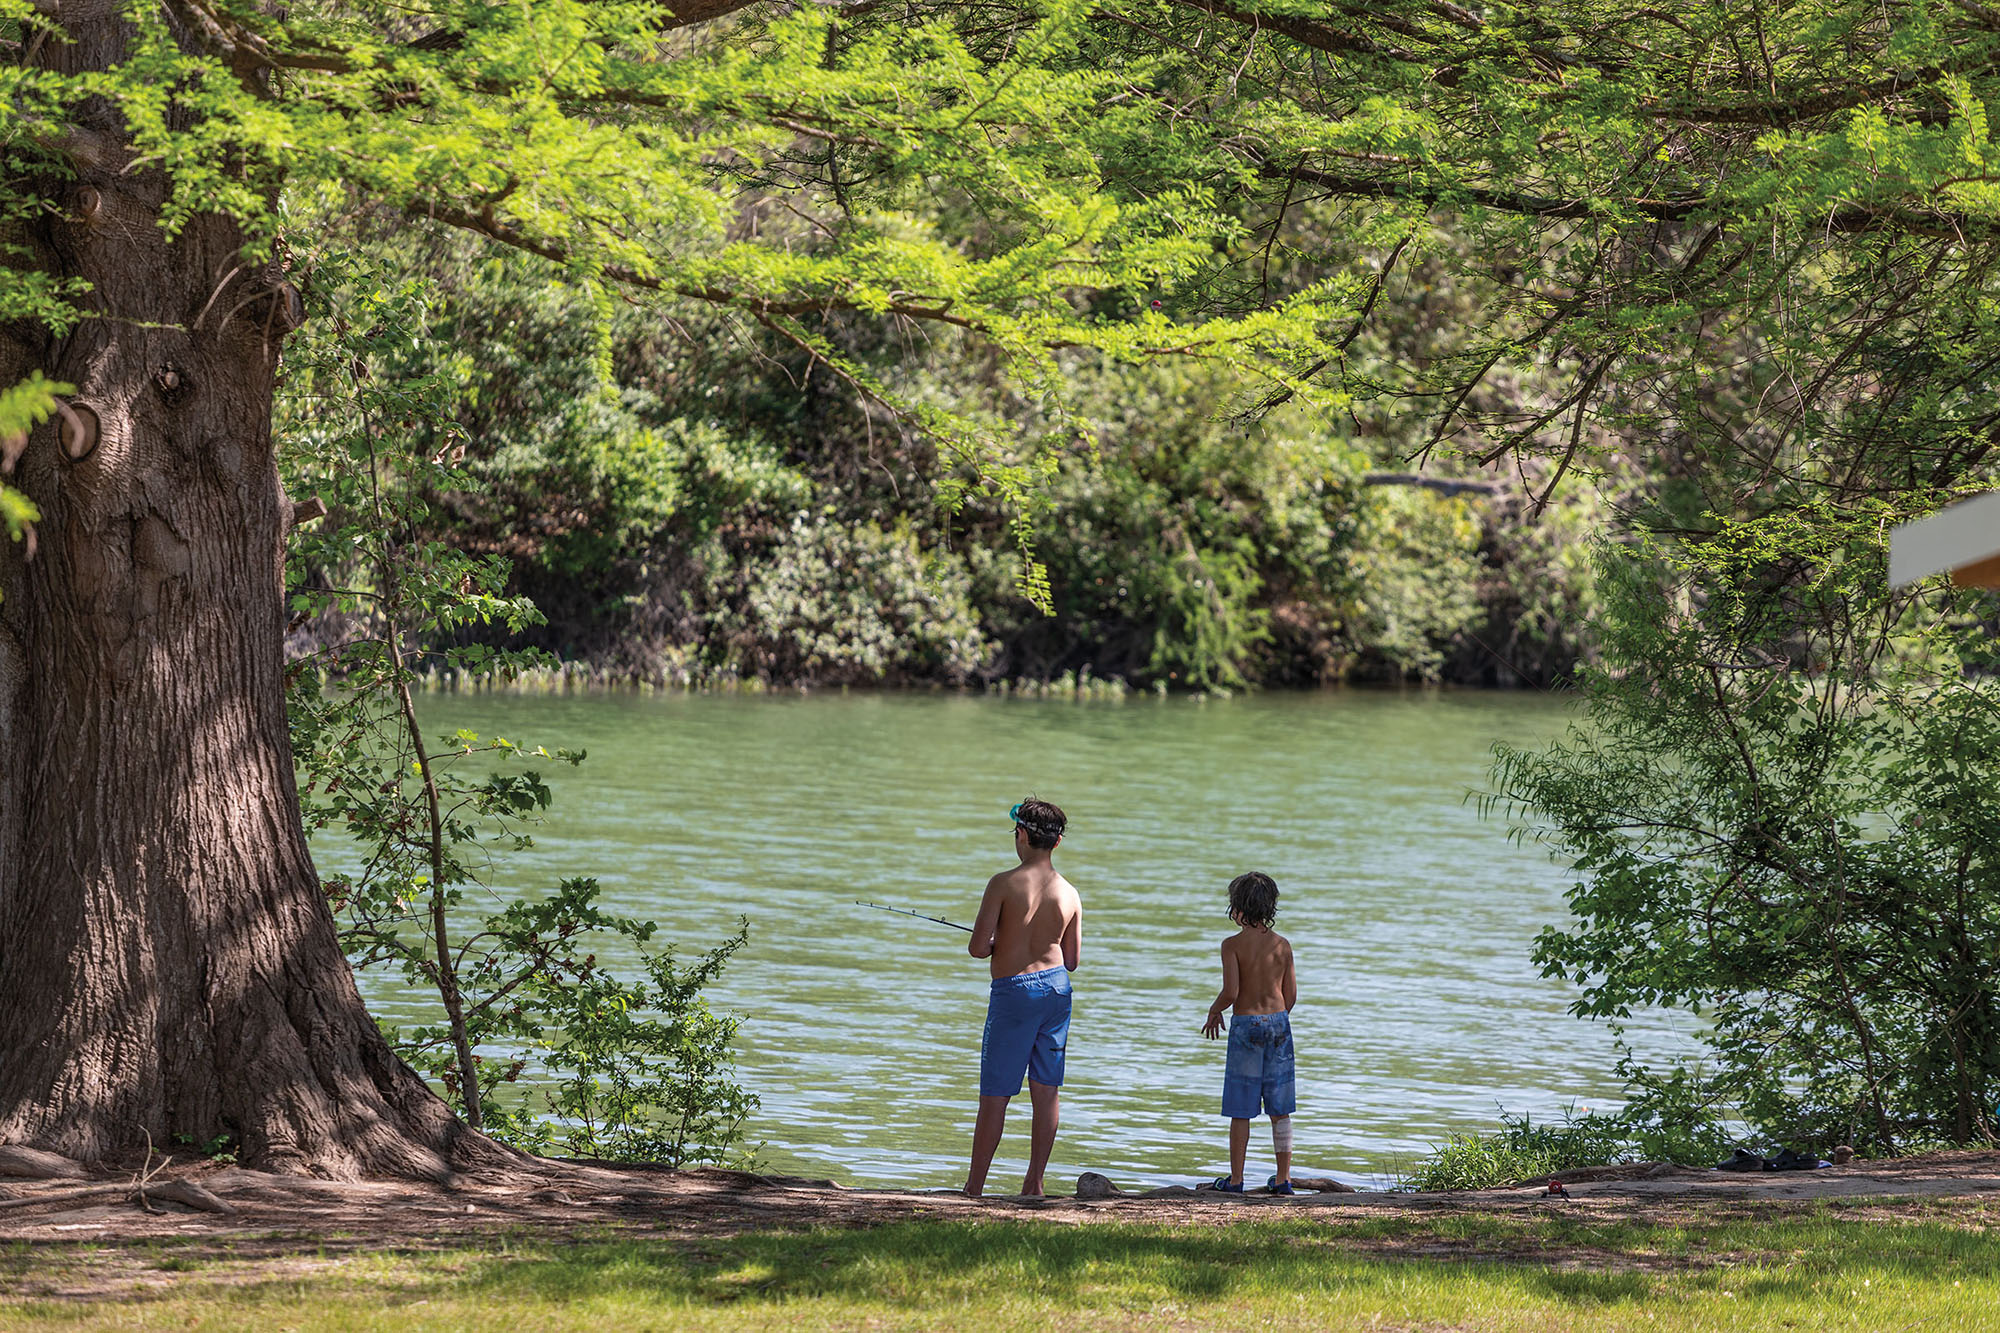 Two young people stand along the banks of a river under green trees